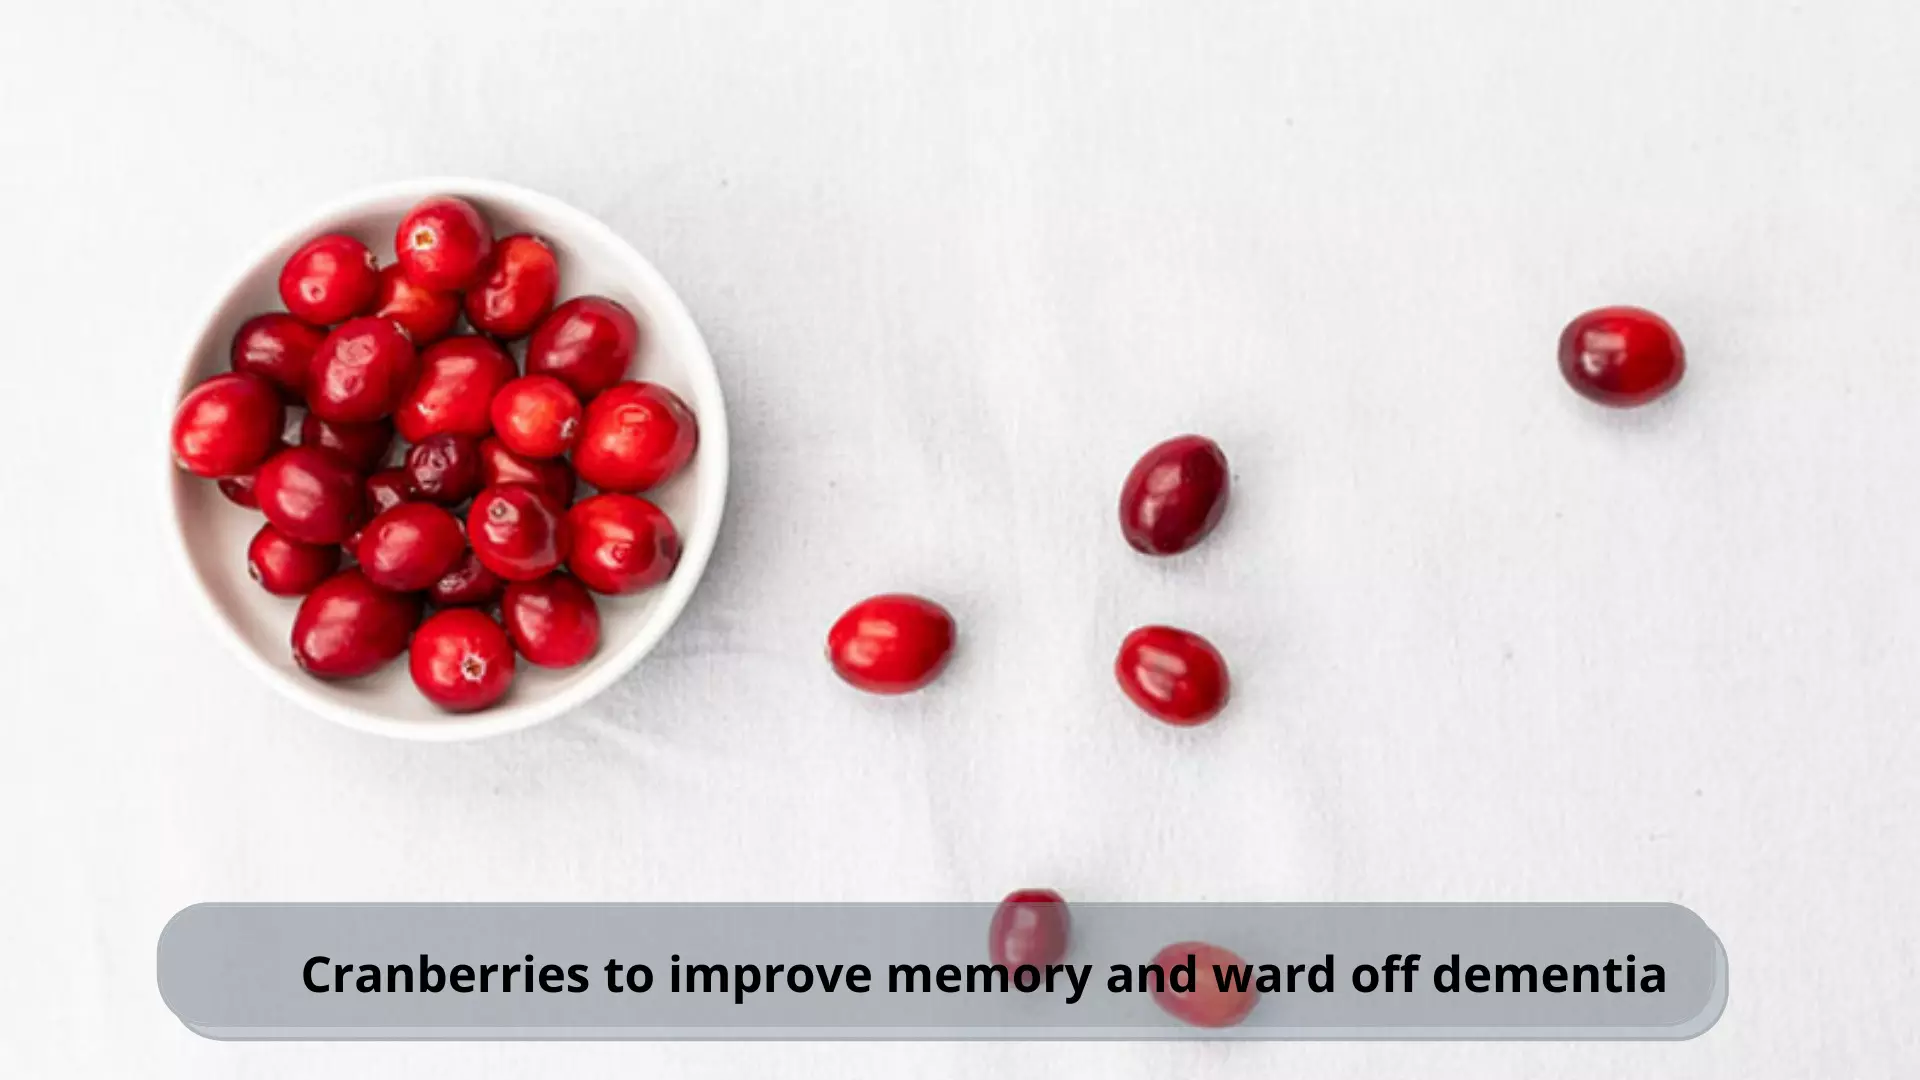 Cranberries to improve memory and ward off dementia